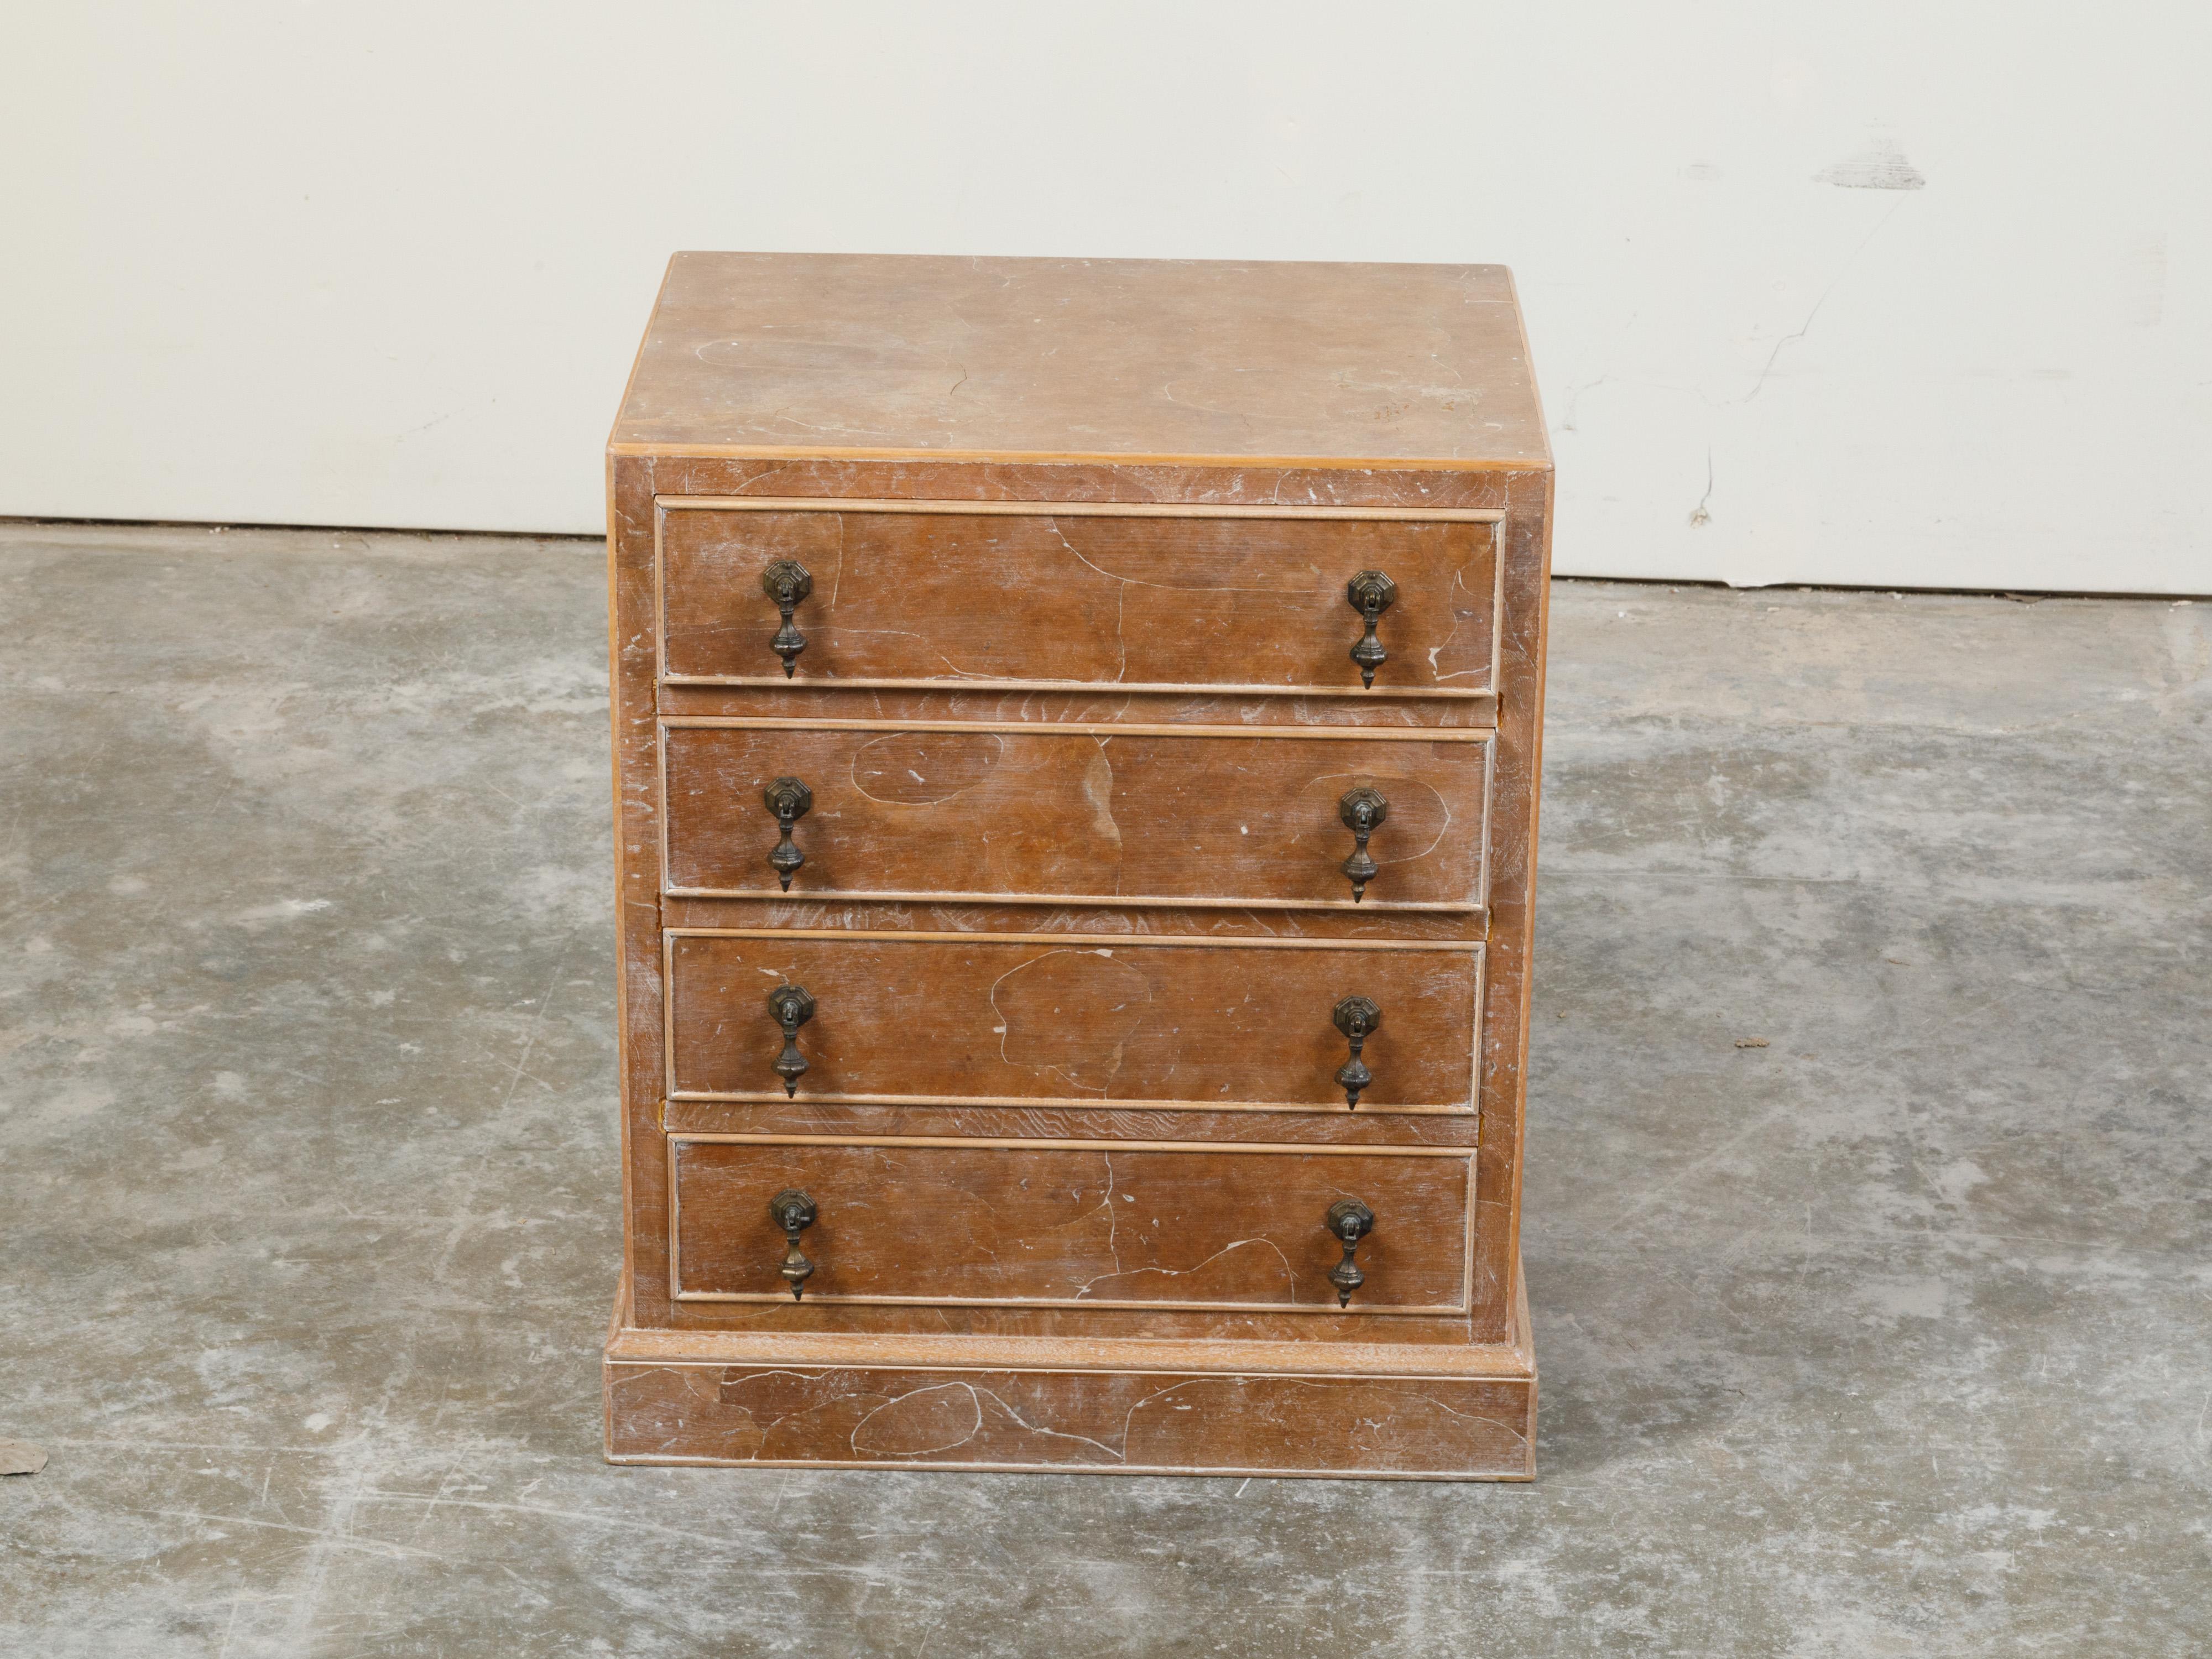 A small English burl wood chest with four drawers and distressed finish. Create in England, this small chest features a rectangular top sitting above four drawers each fitted with two ornate pulls. Boasting a nicely weathered appearance and resting